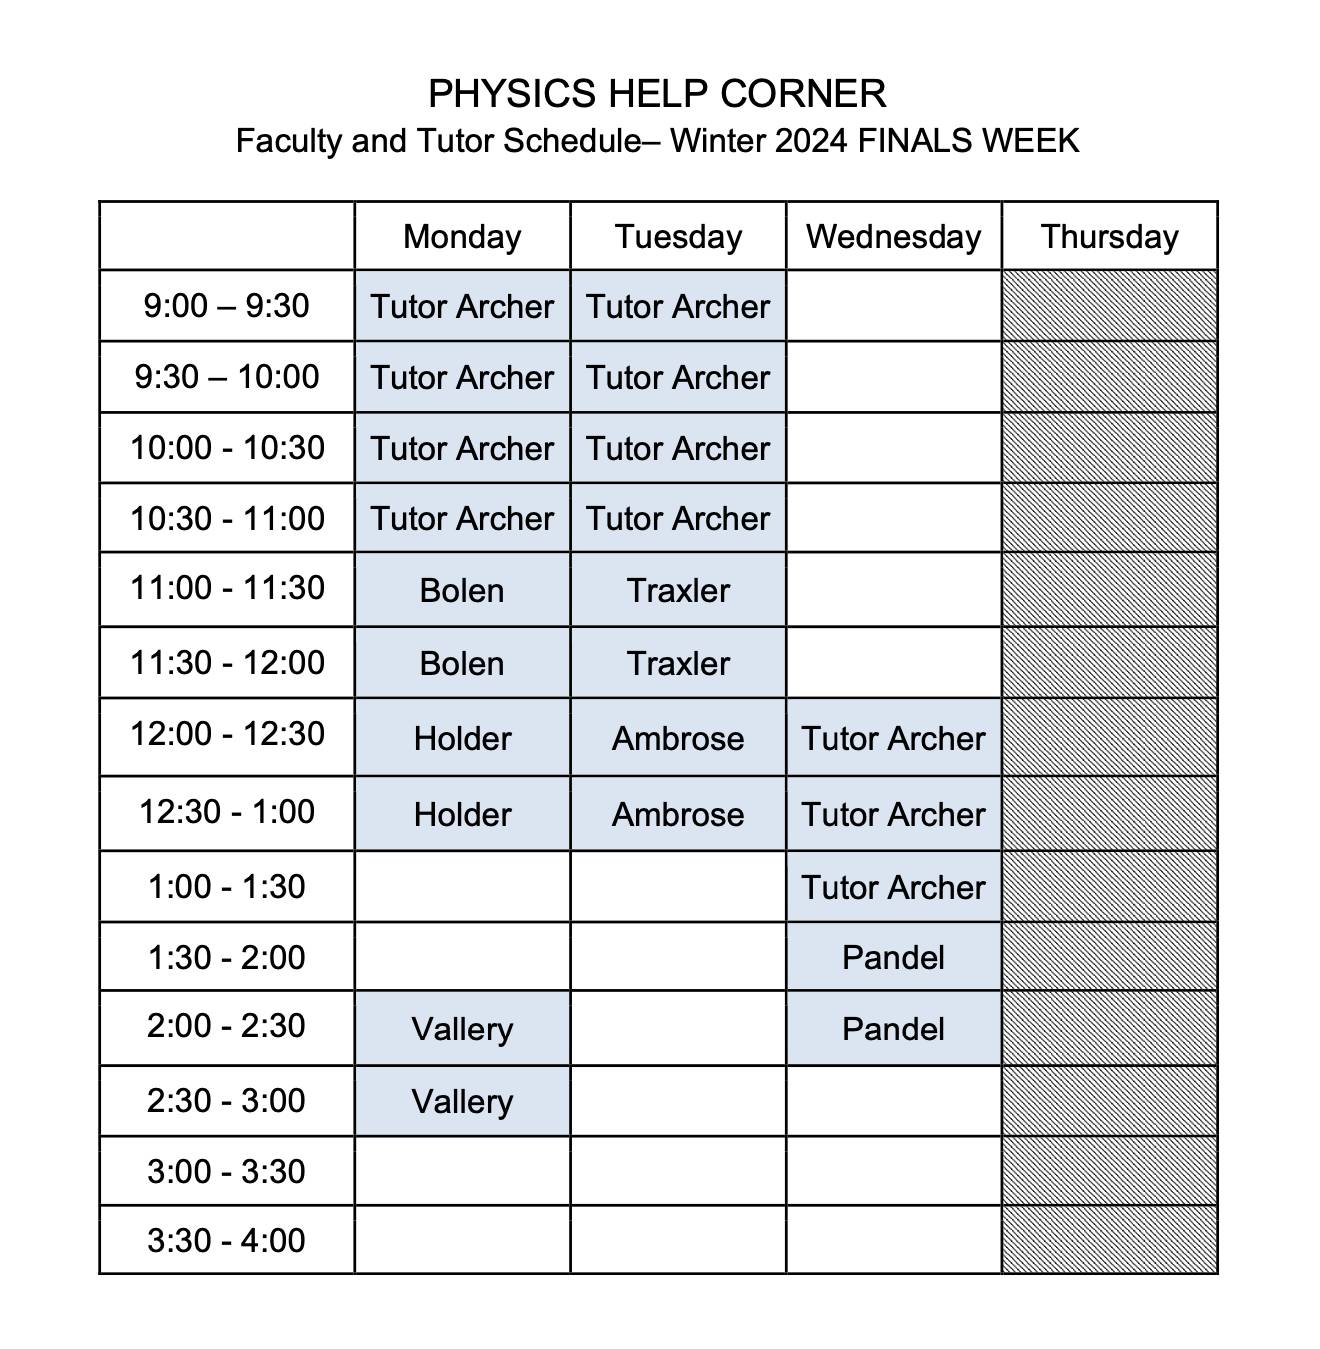 Weekly schedule for the Physics Help Corner Finals Week W2024 (click to download)